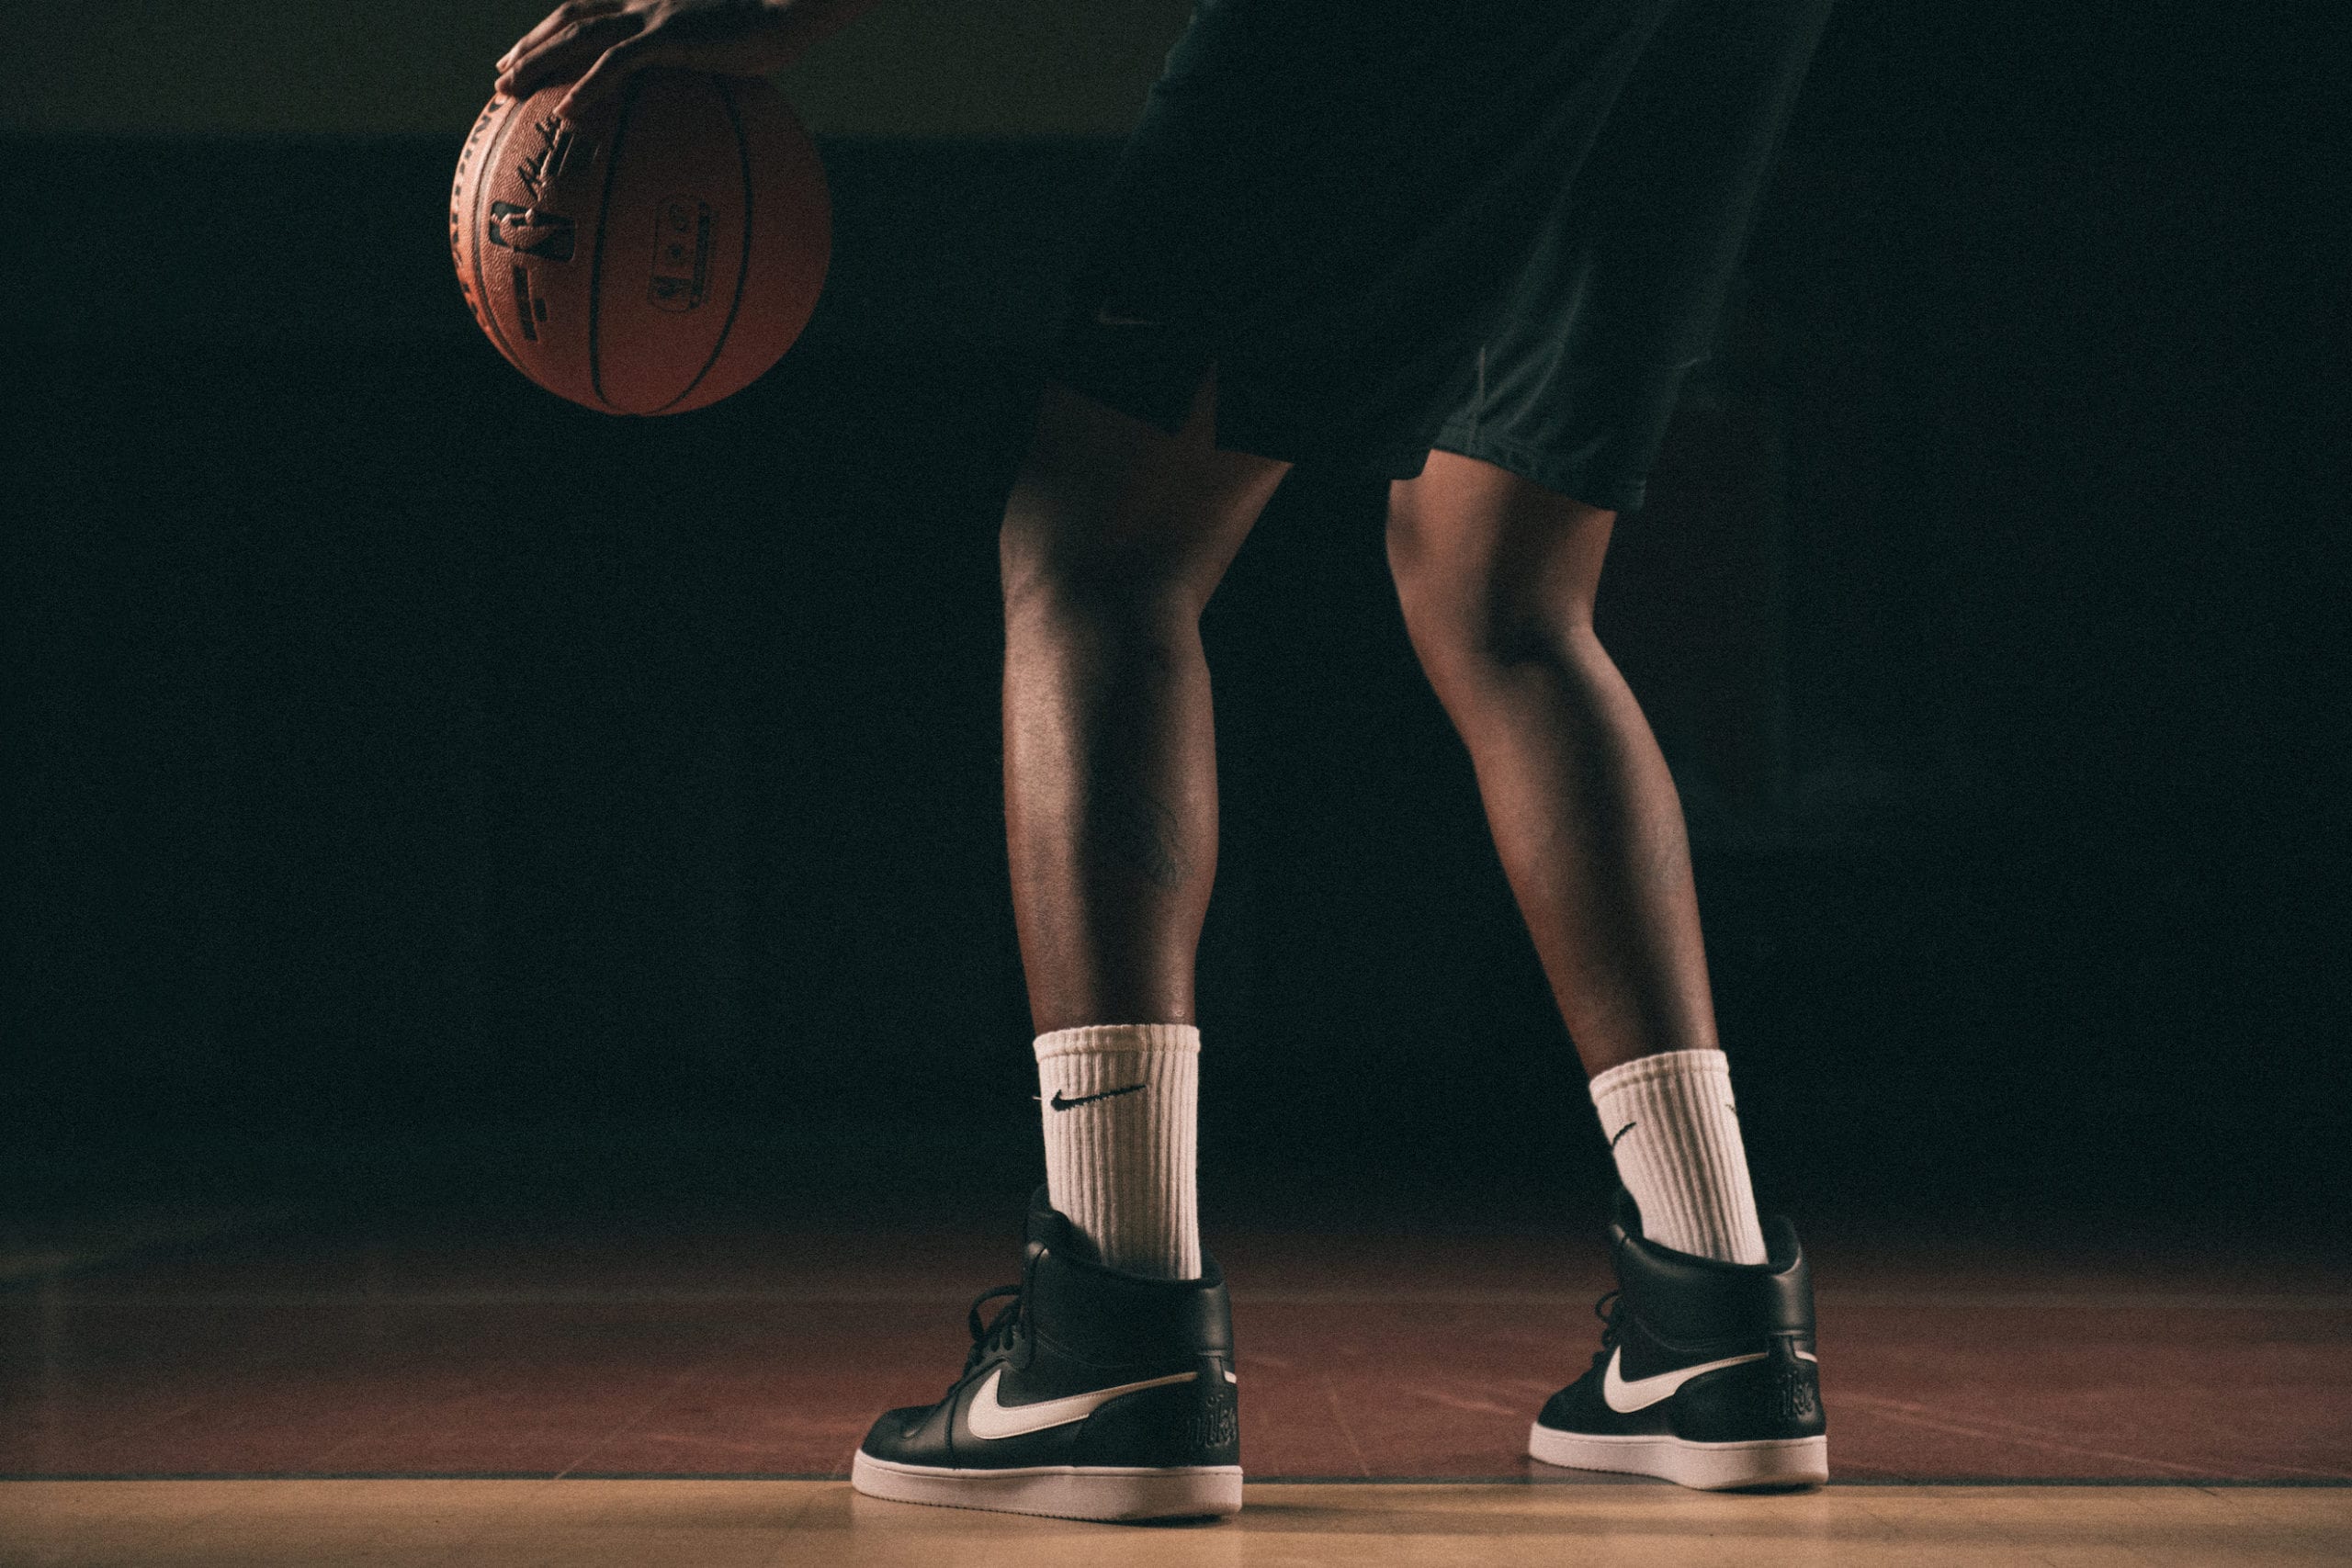 View from behind of the lower half of an African American man wearing black Nike shoes and white Nike socks poised holding a basketball on a basketball court with a light shining on him in semi darkness